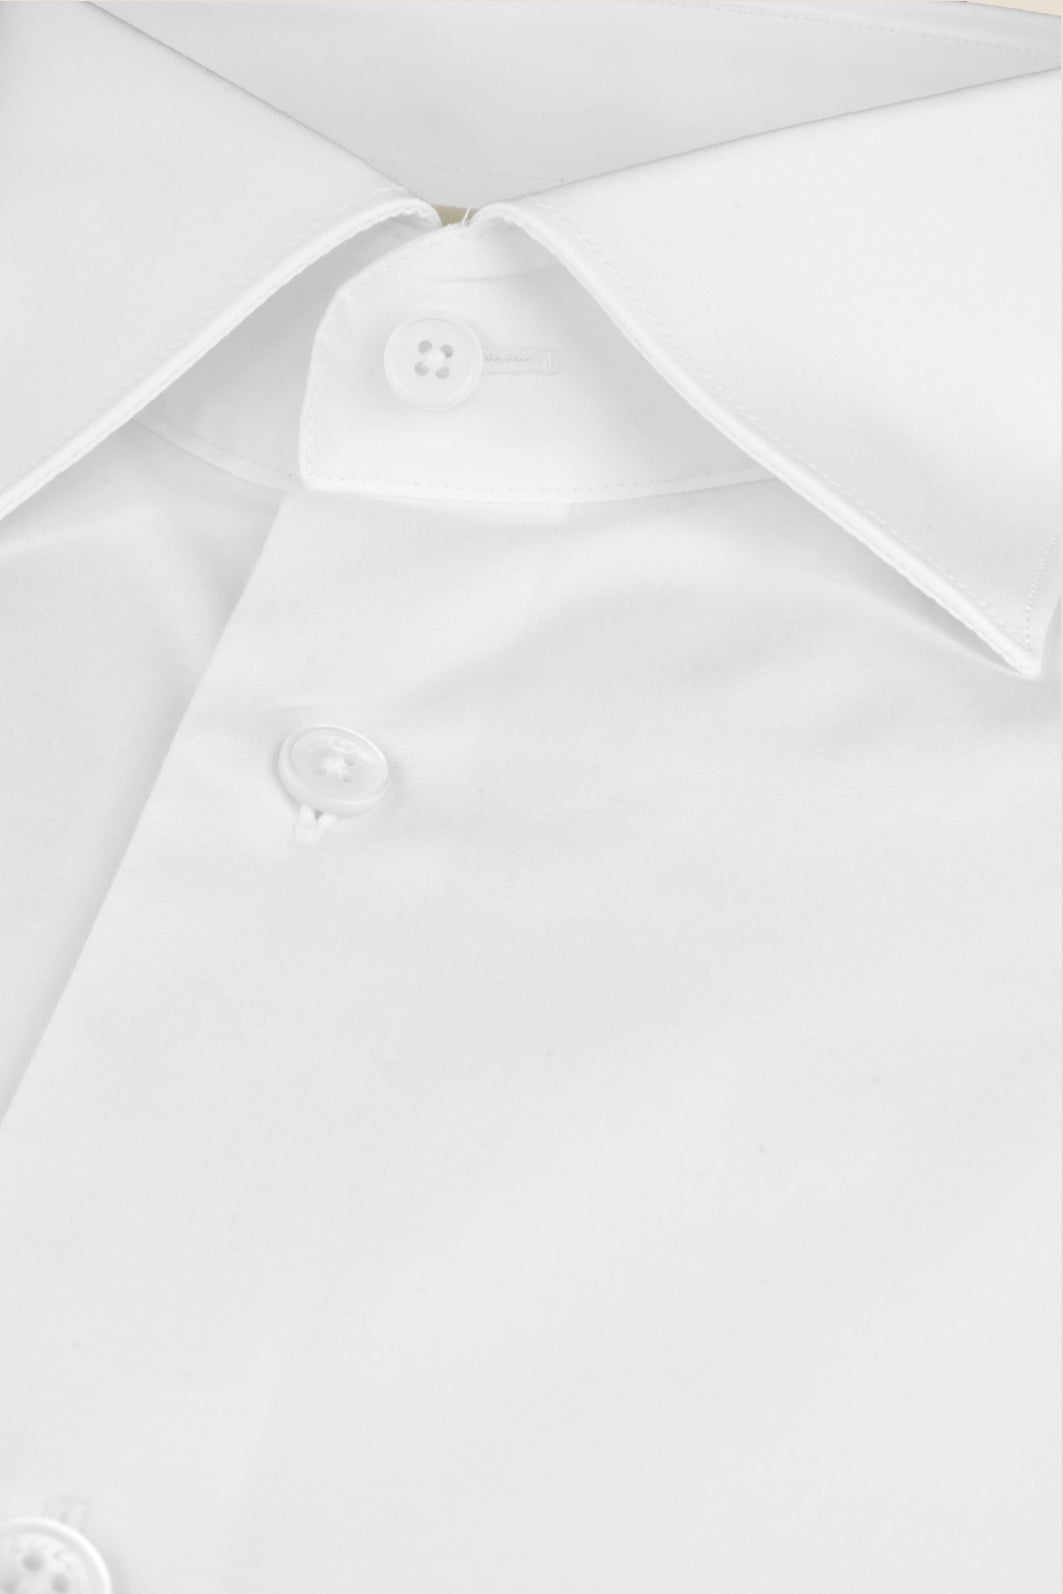 White business shirt made of organic cotton with a classic shark collar and cuffs and a casual cut - Made to order